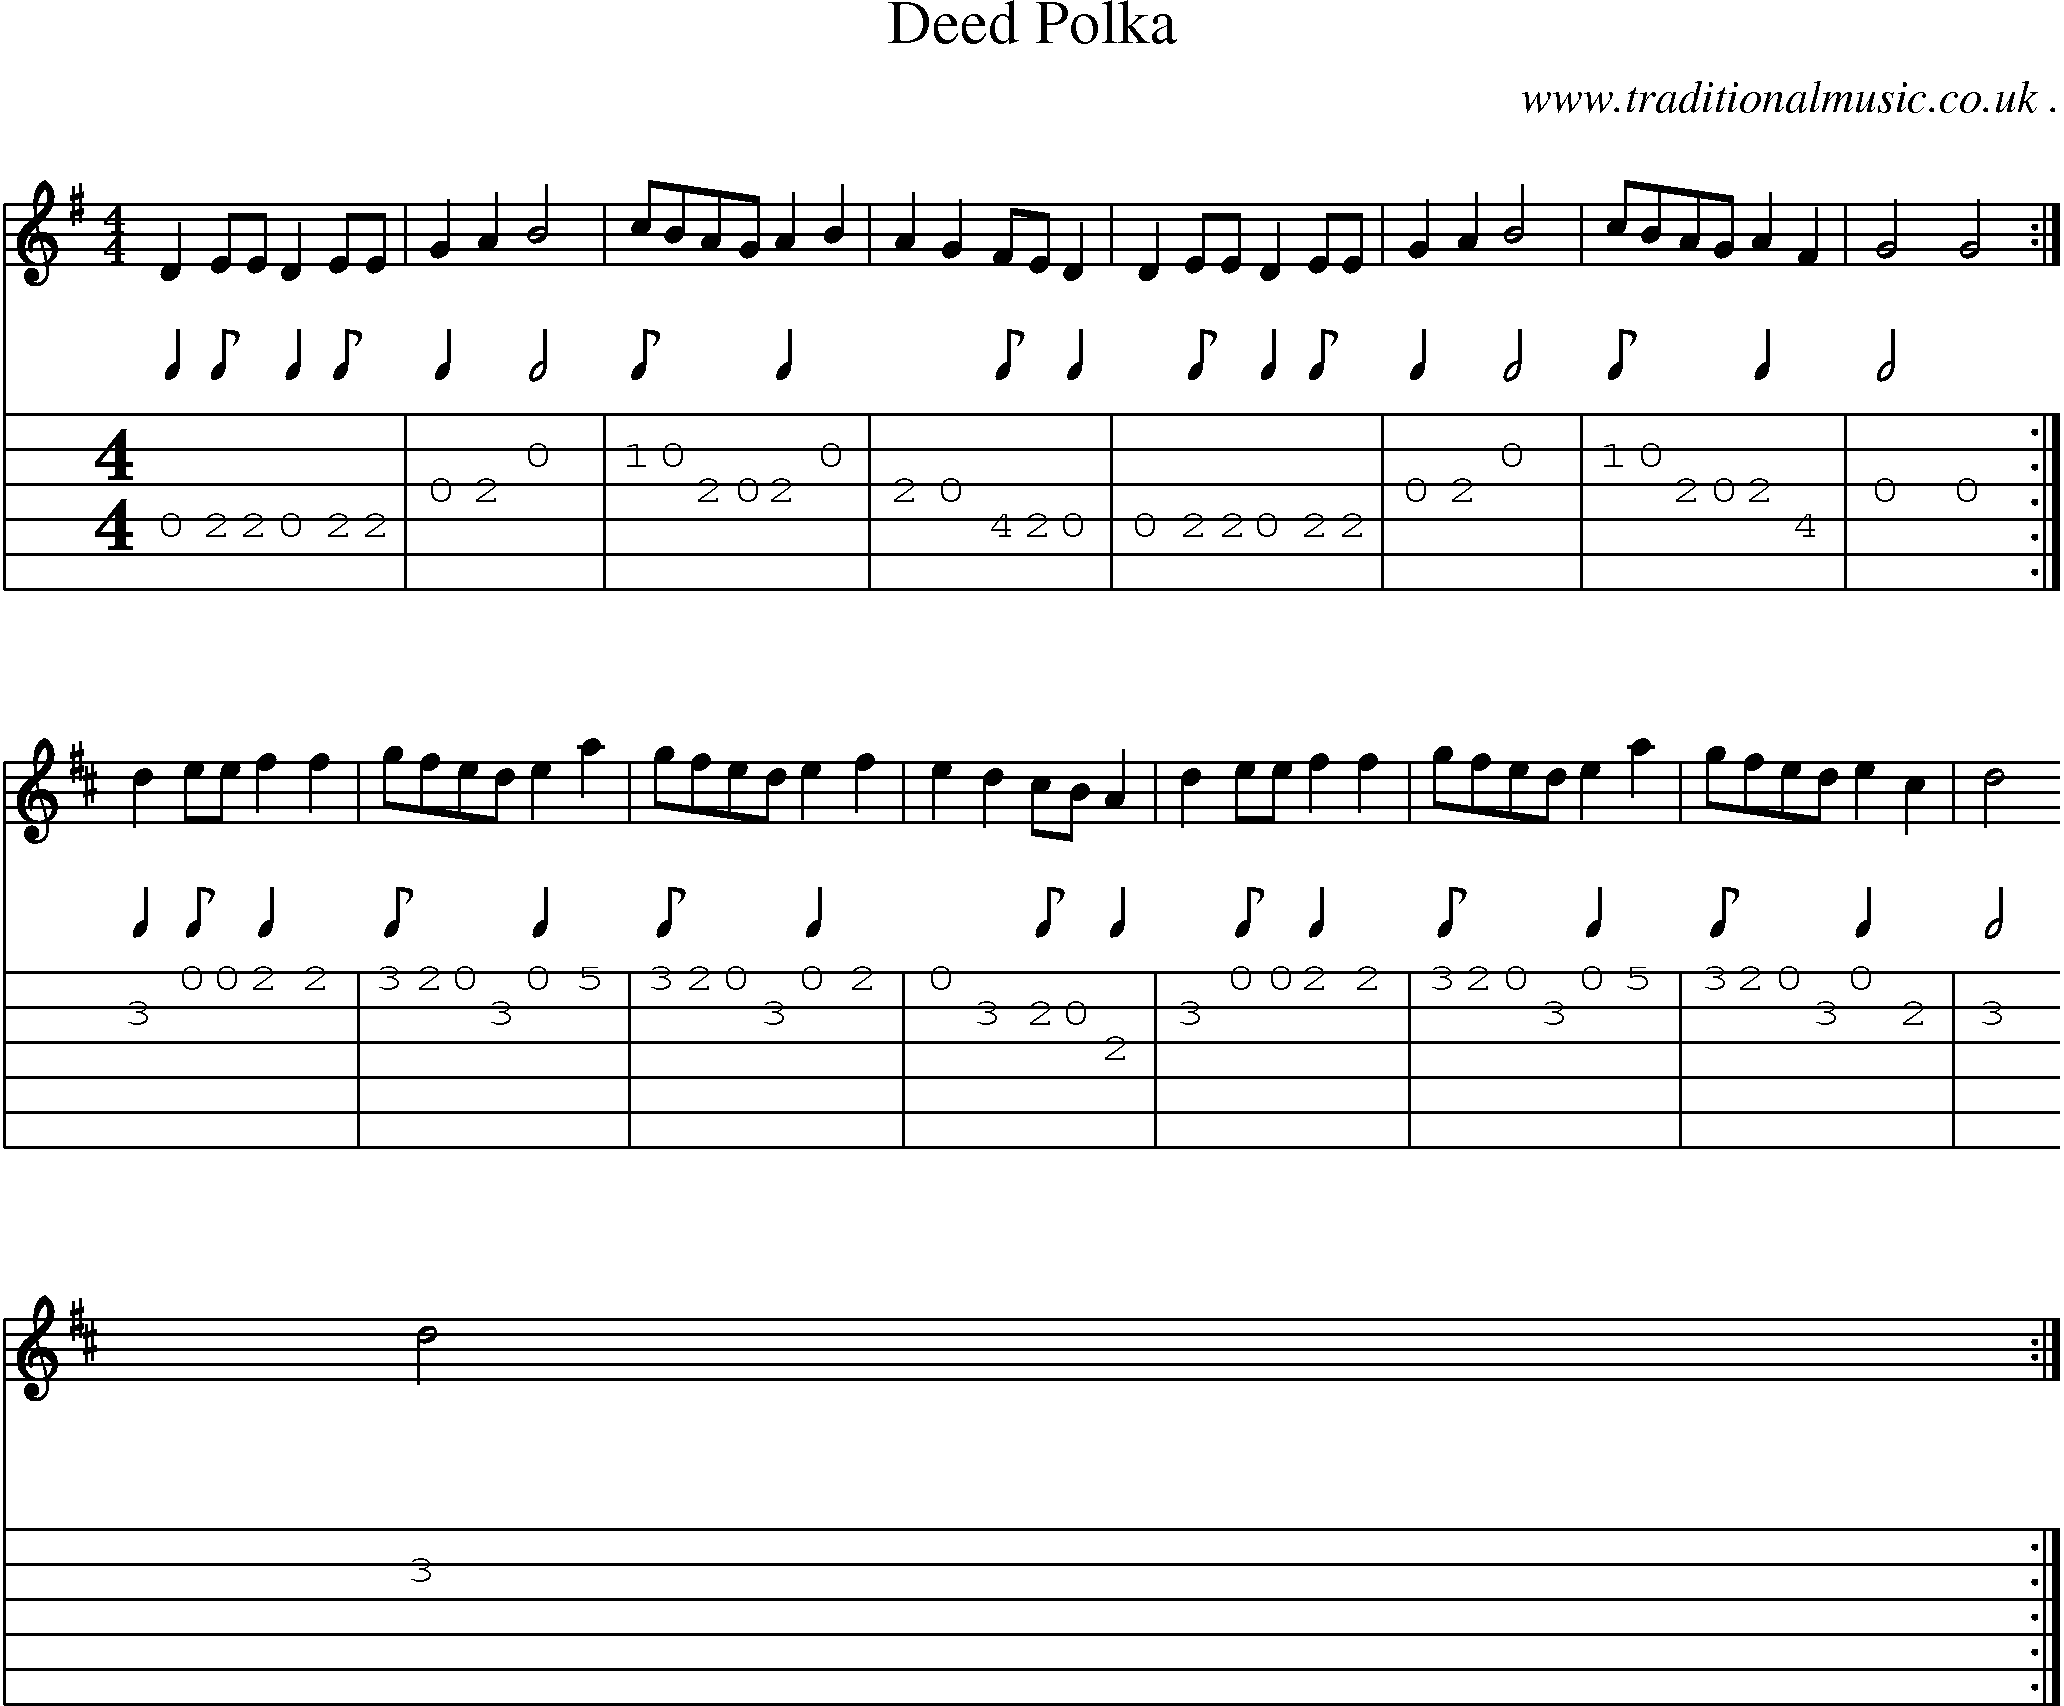 Sheet-Music and Guitar Tabs for Deed Polka